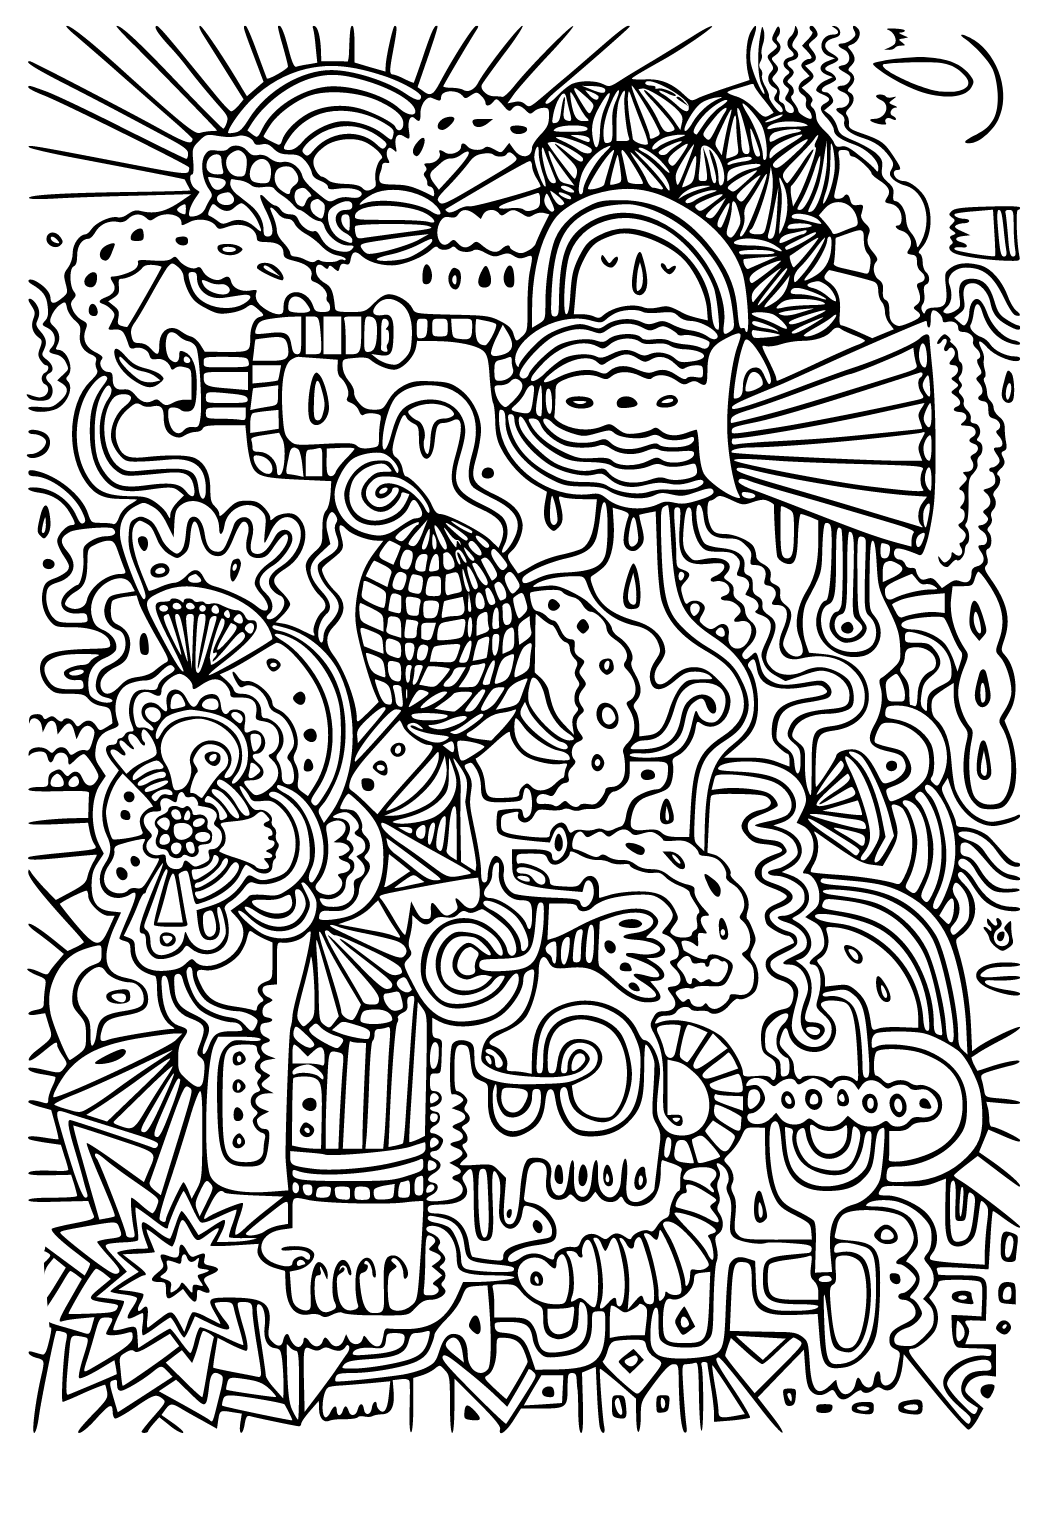 Free Printable Difficult Pattern Coloring Page, Sheet and Picture for  Adults and Kids (Girls and Boys) - Babeled.com